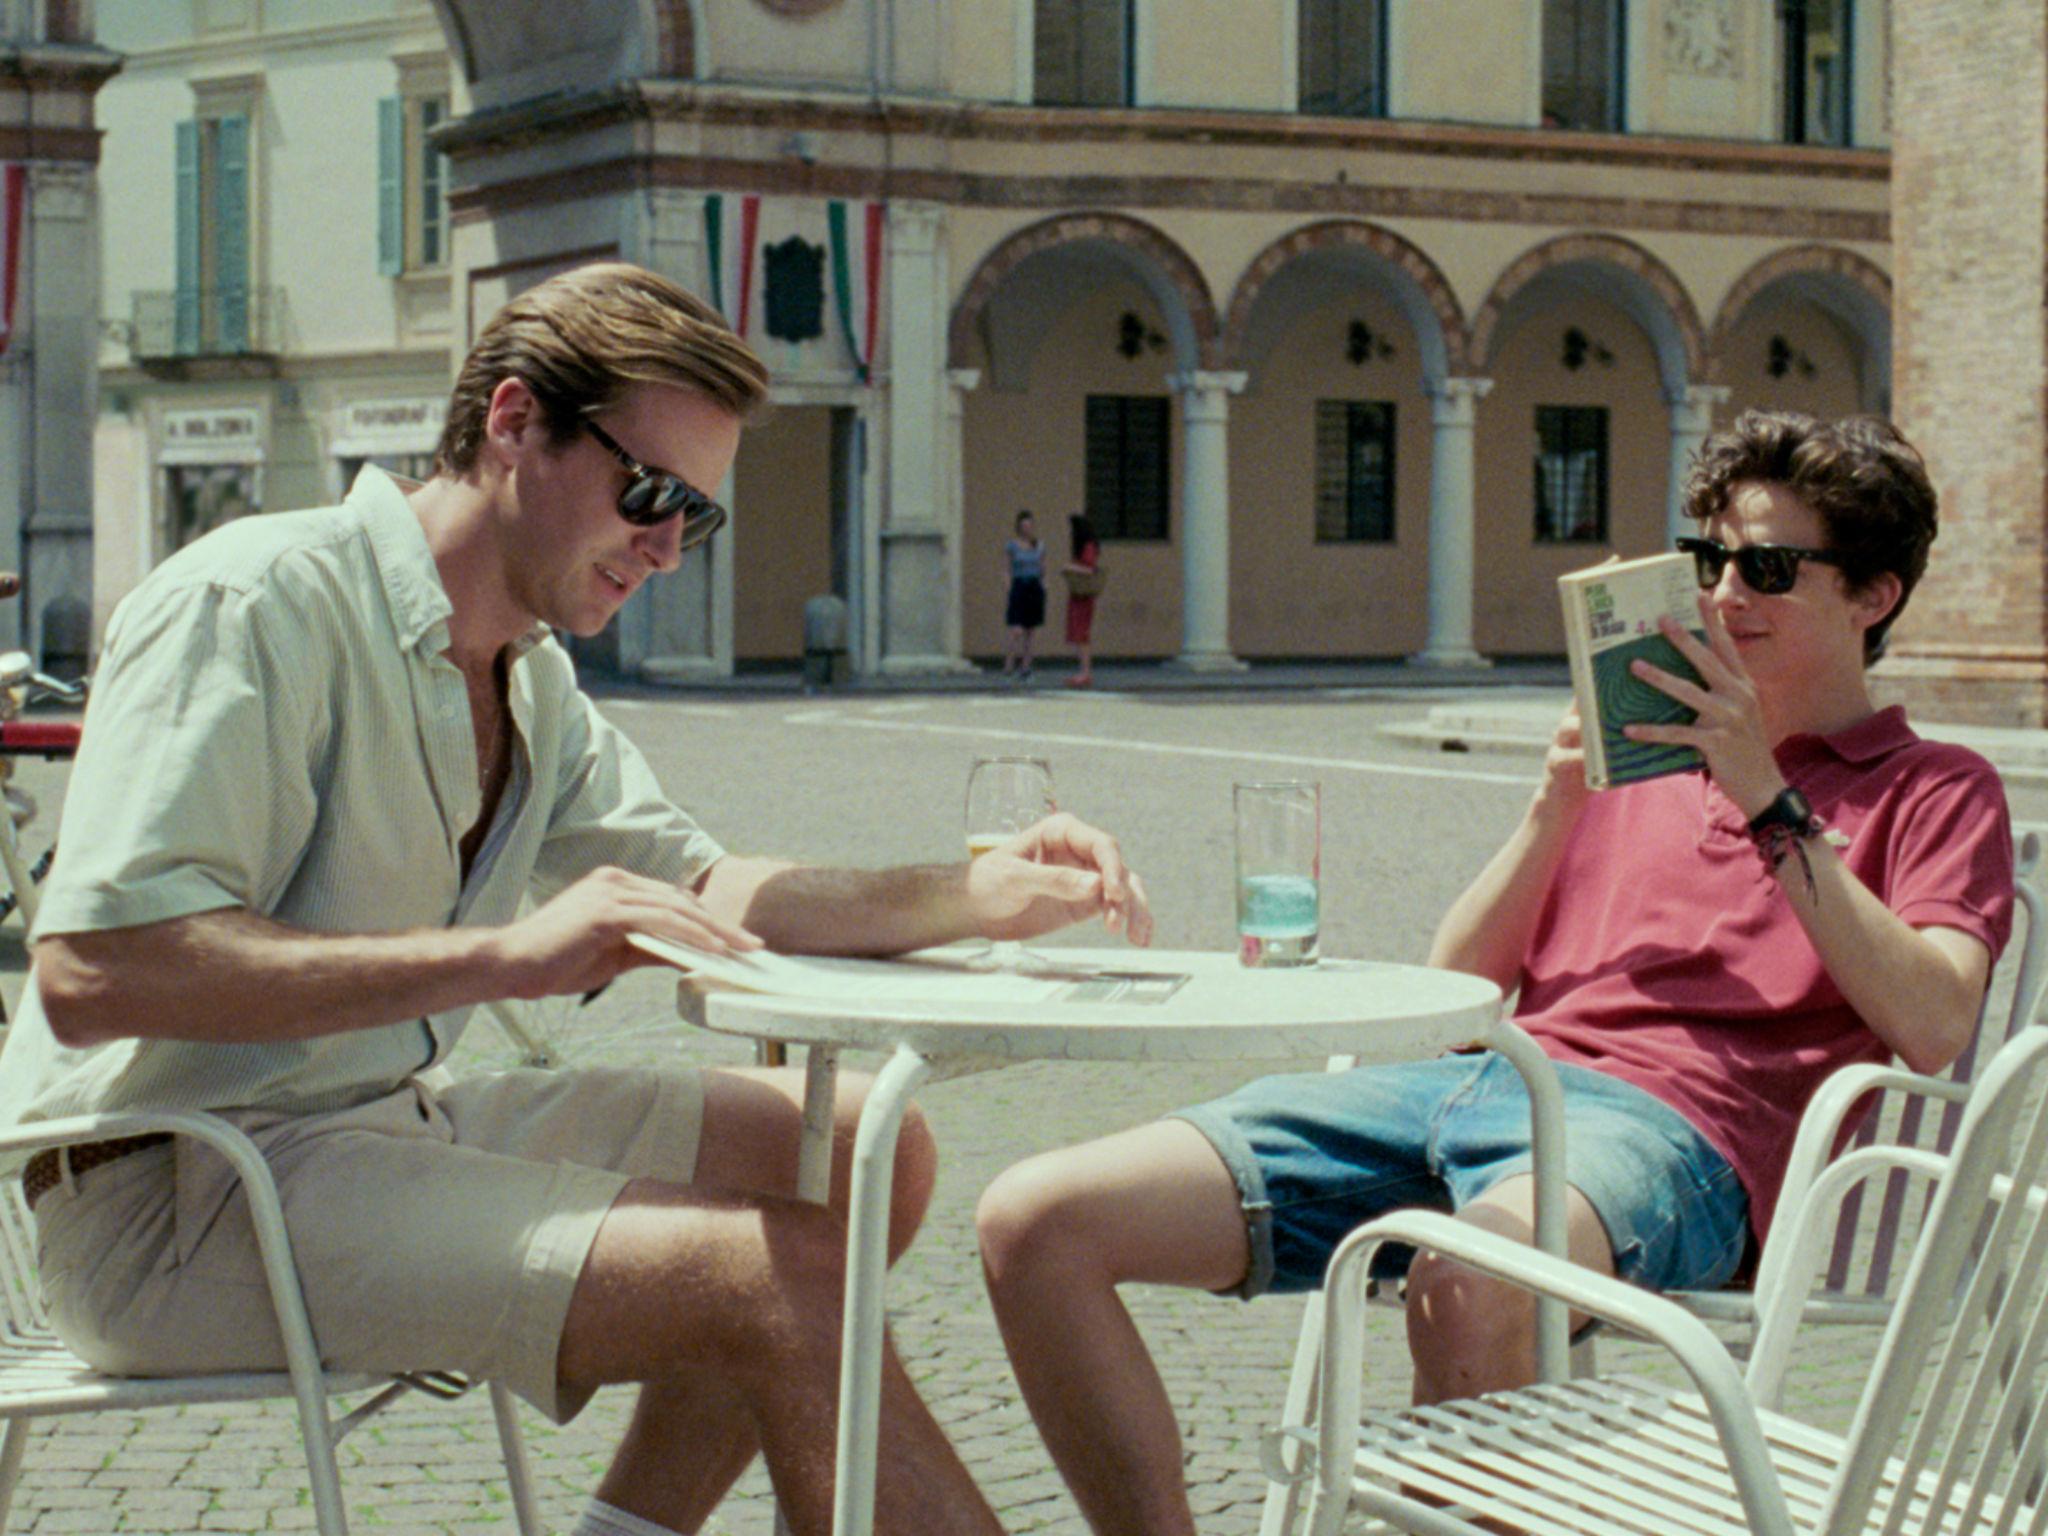 Call Me By Your Name Director Luca Guadagnino On The Film Everyone Is Talking About The